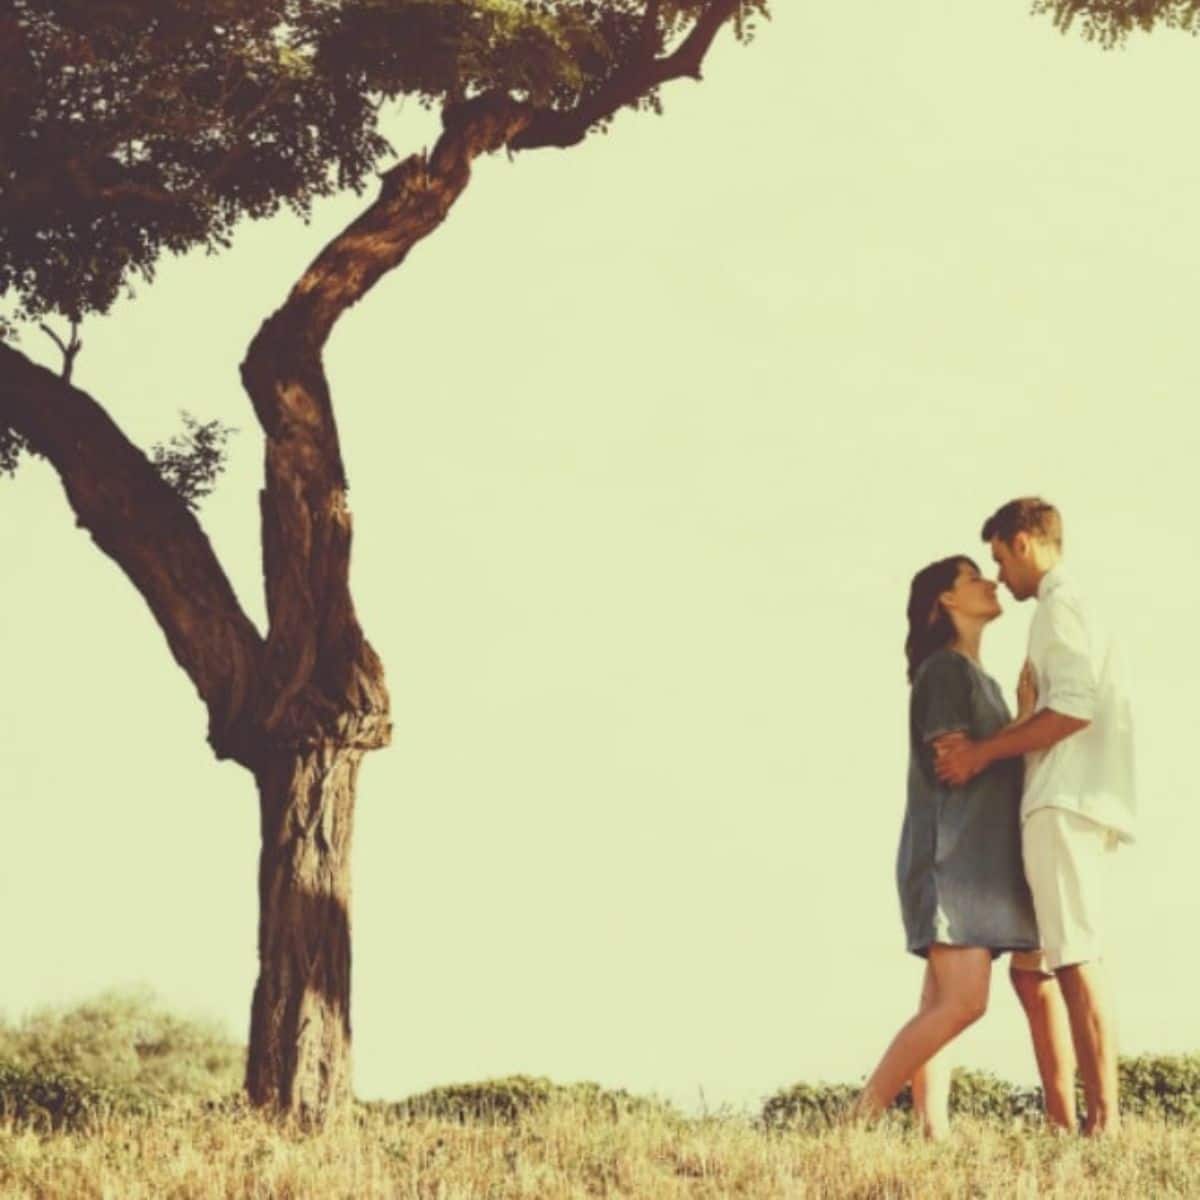 Young couple holding eachother under a tree.